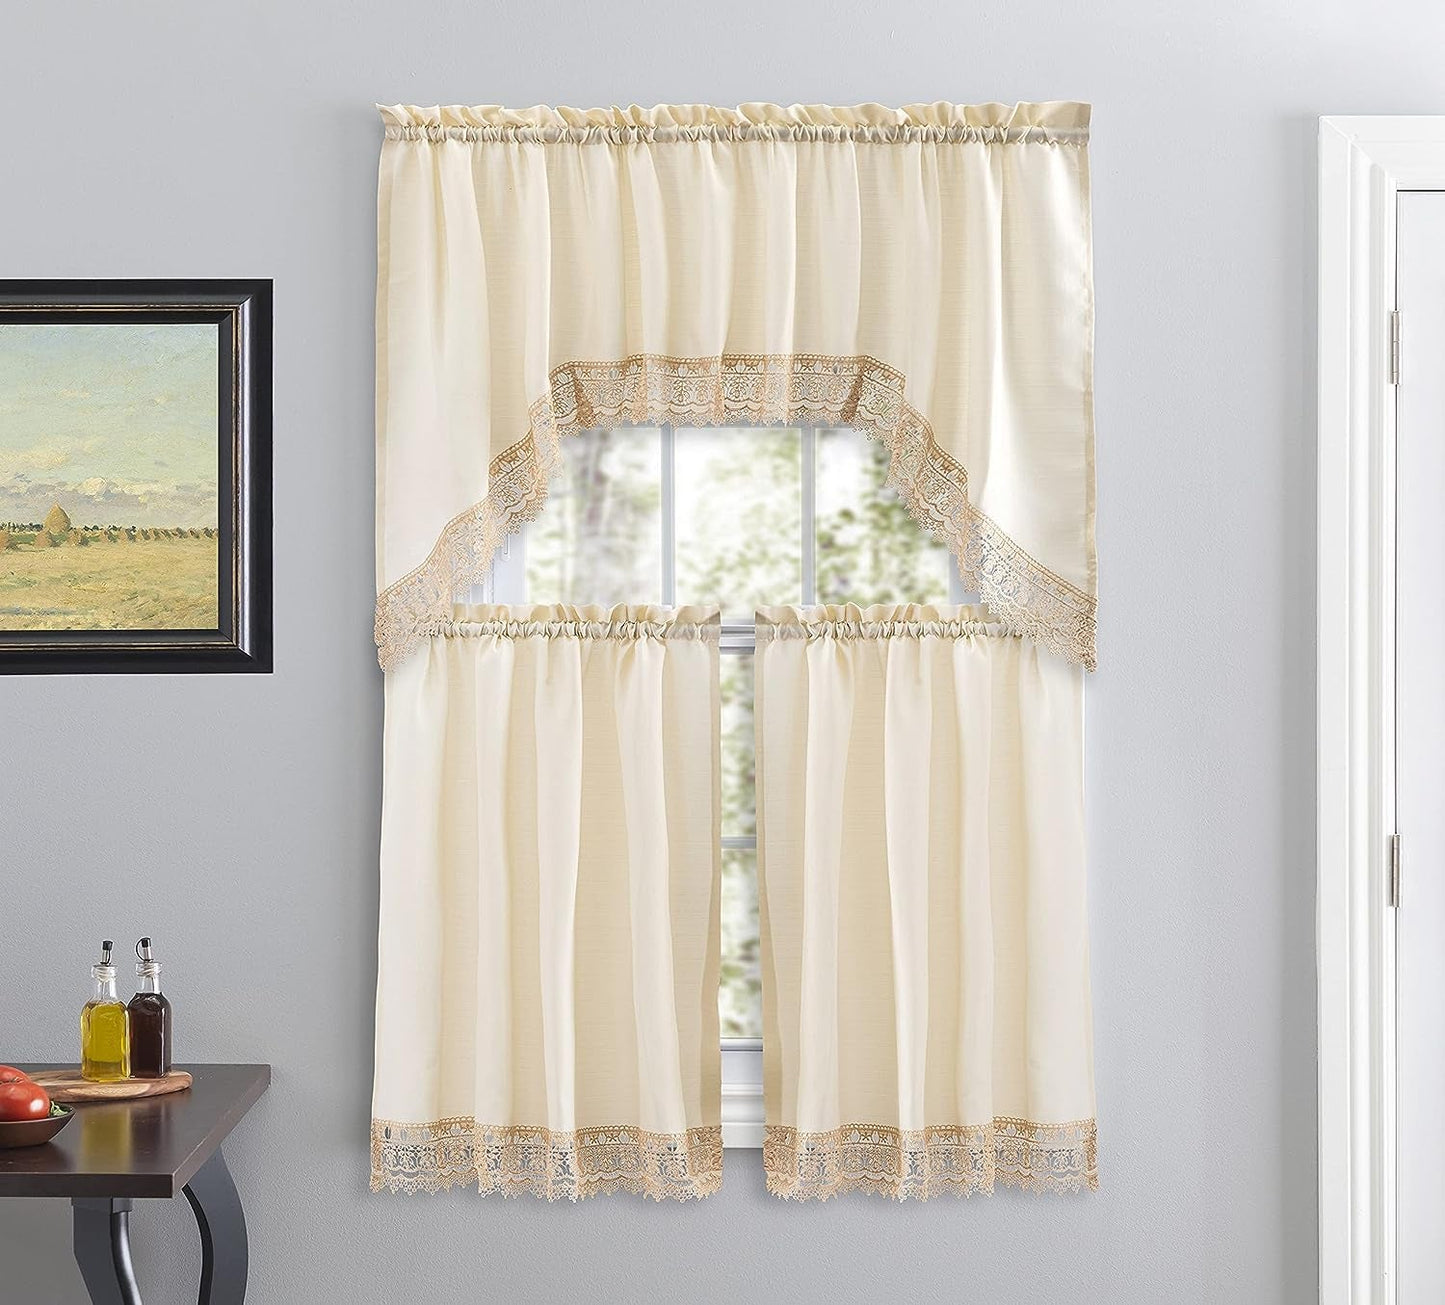 American Linen Café Curtains for Kitchen, Bathroom Curtains with Valance, Embroidered Lace Border. (White)